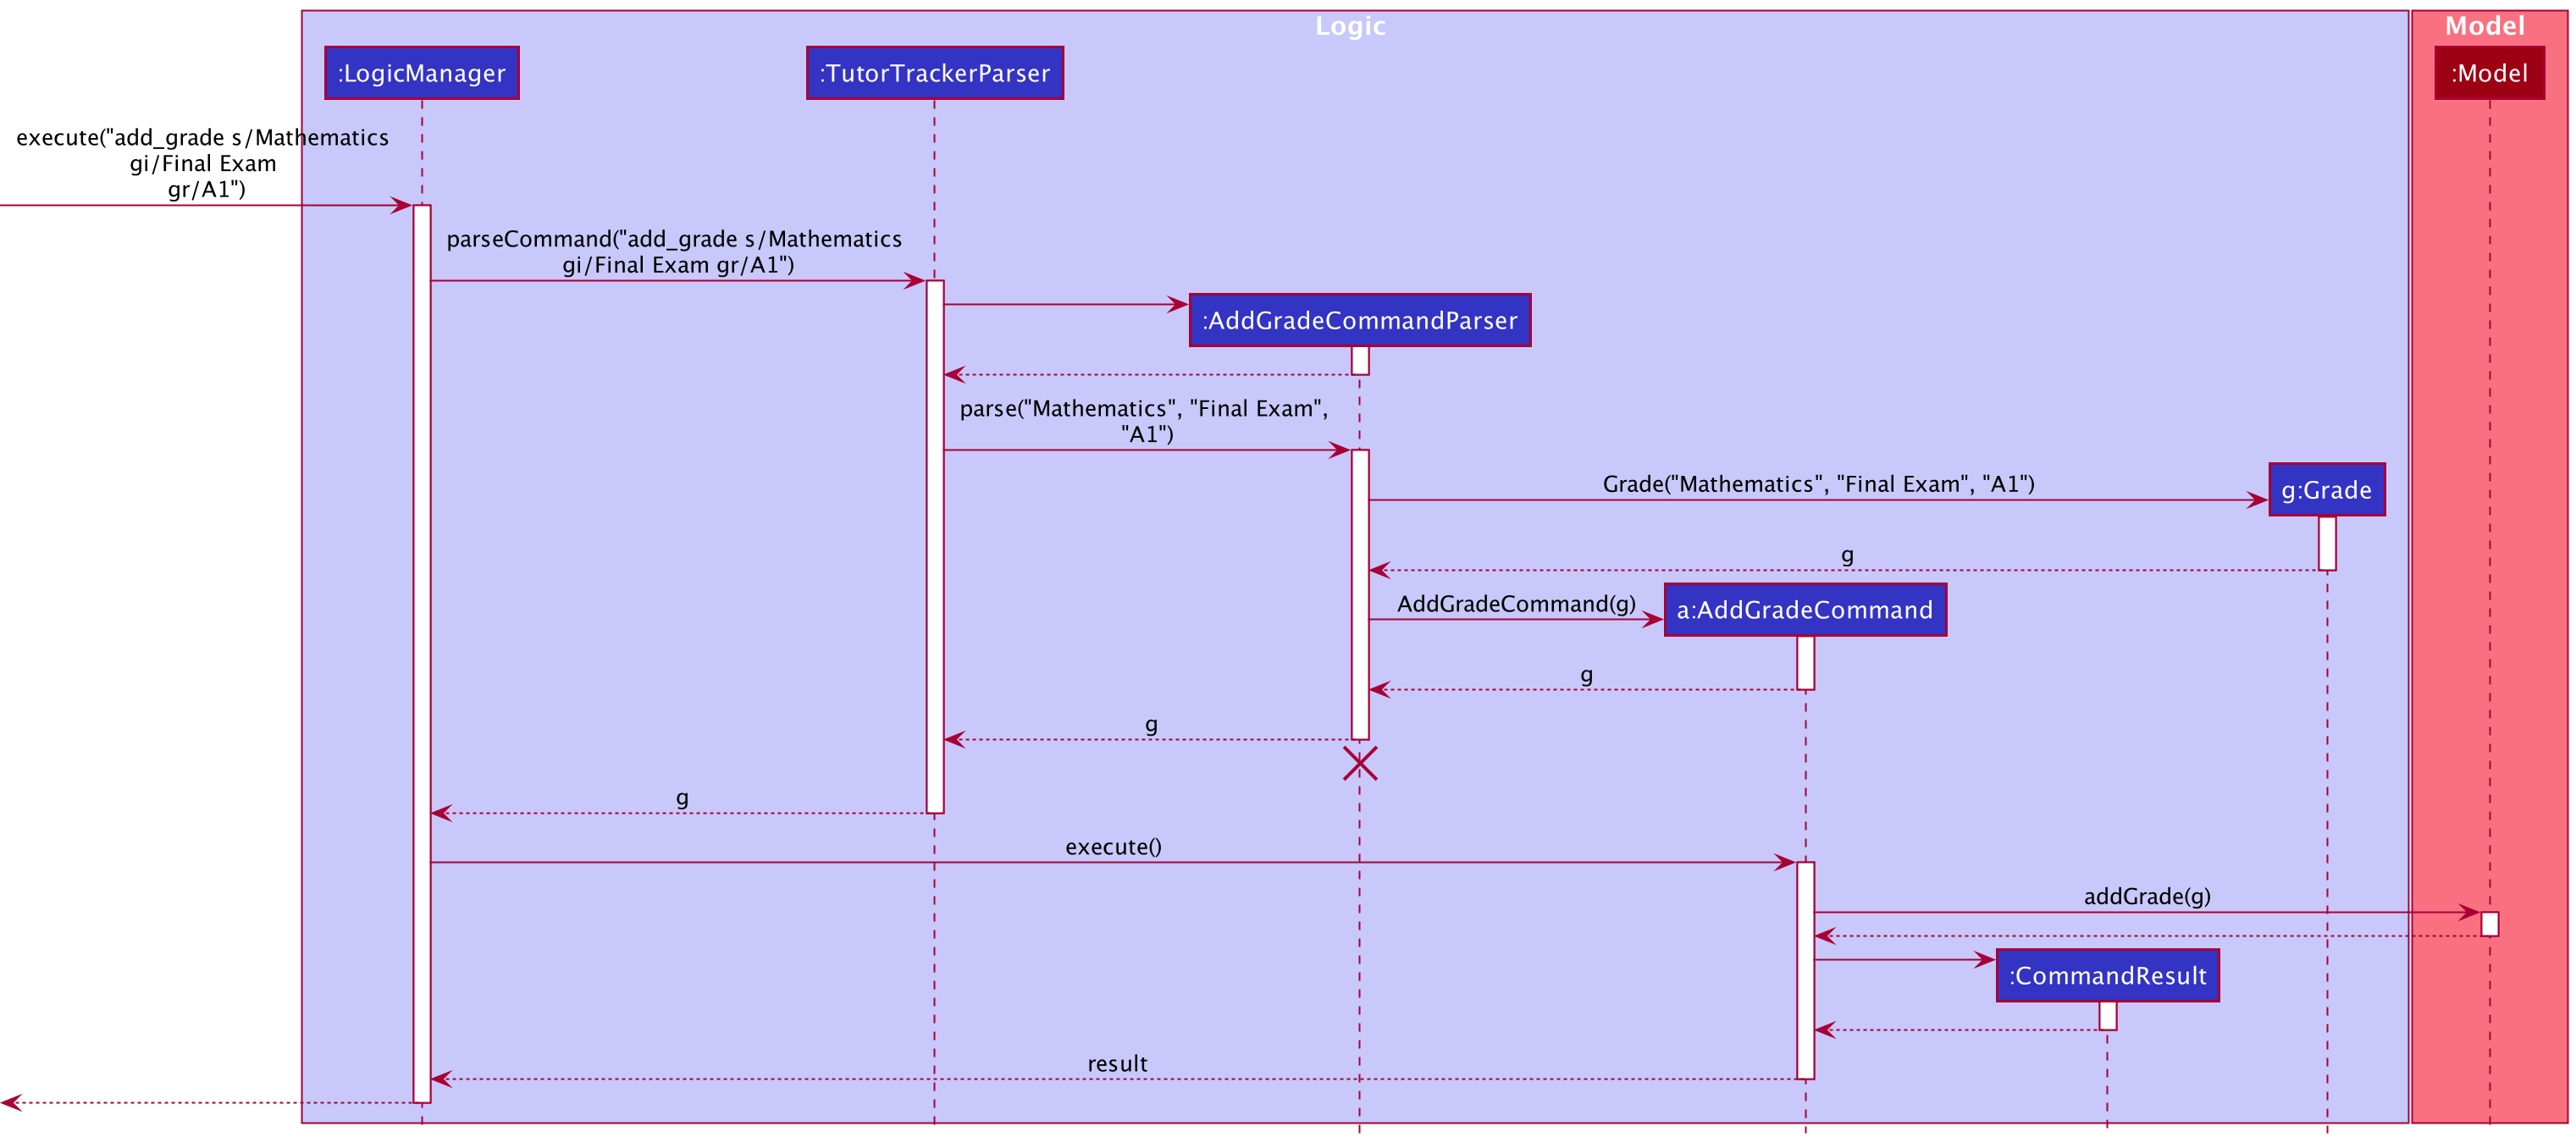 Sequence Diagram of Add Grade